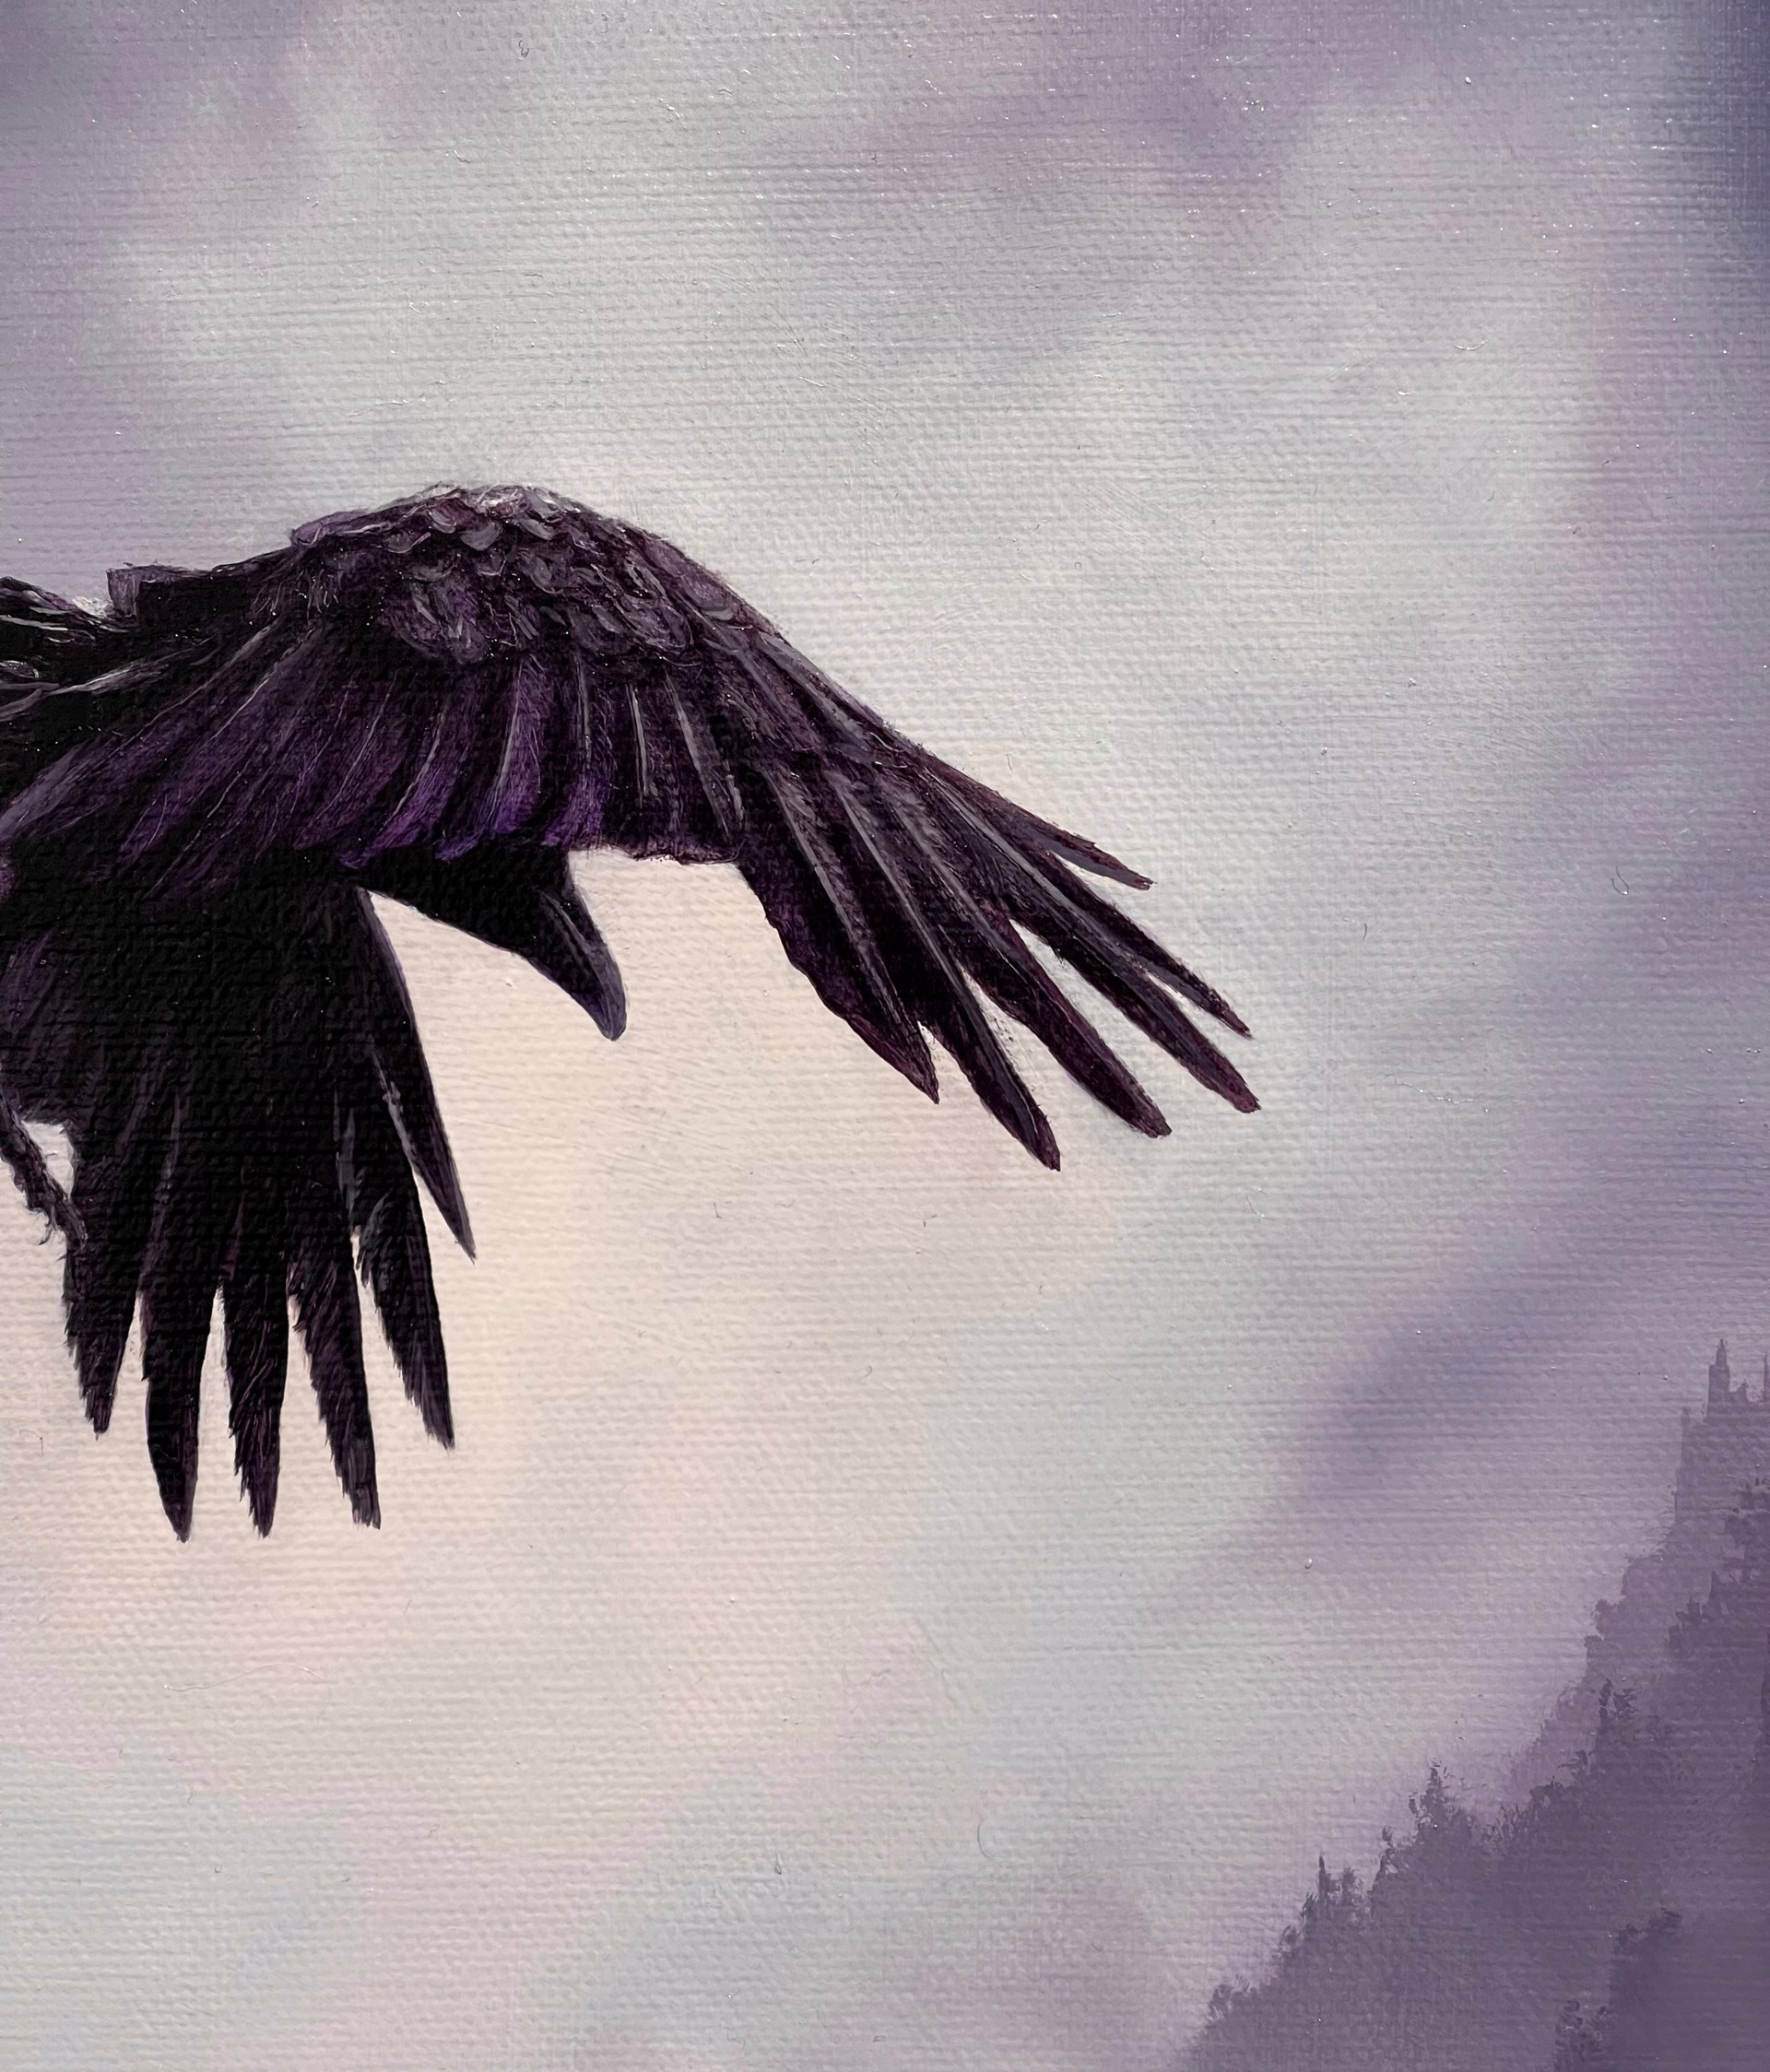 Raven Aloft Over Foggy Barbed Wire by Brian Mashburn